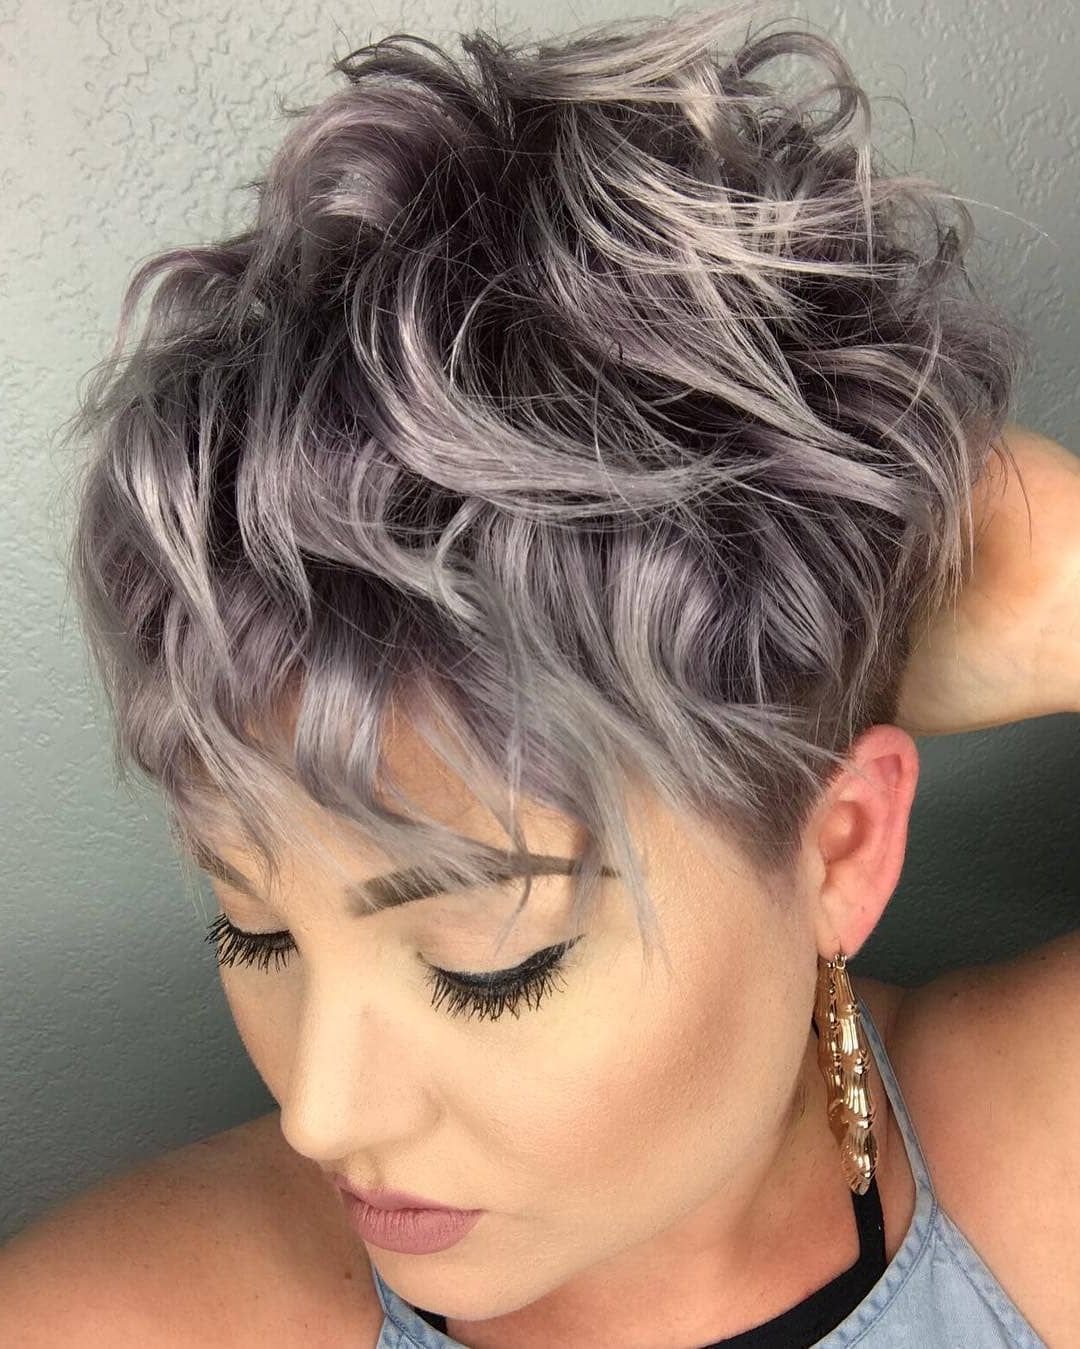 Messy Pixie Haircuts To Refresh Your Face, Women Short Throughout Latest Edgy Messy Pixie Haircuts (View 15 of 20)